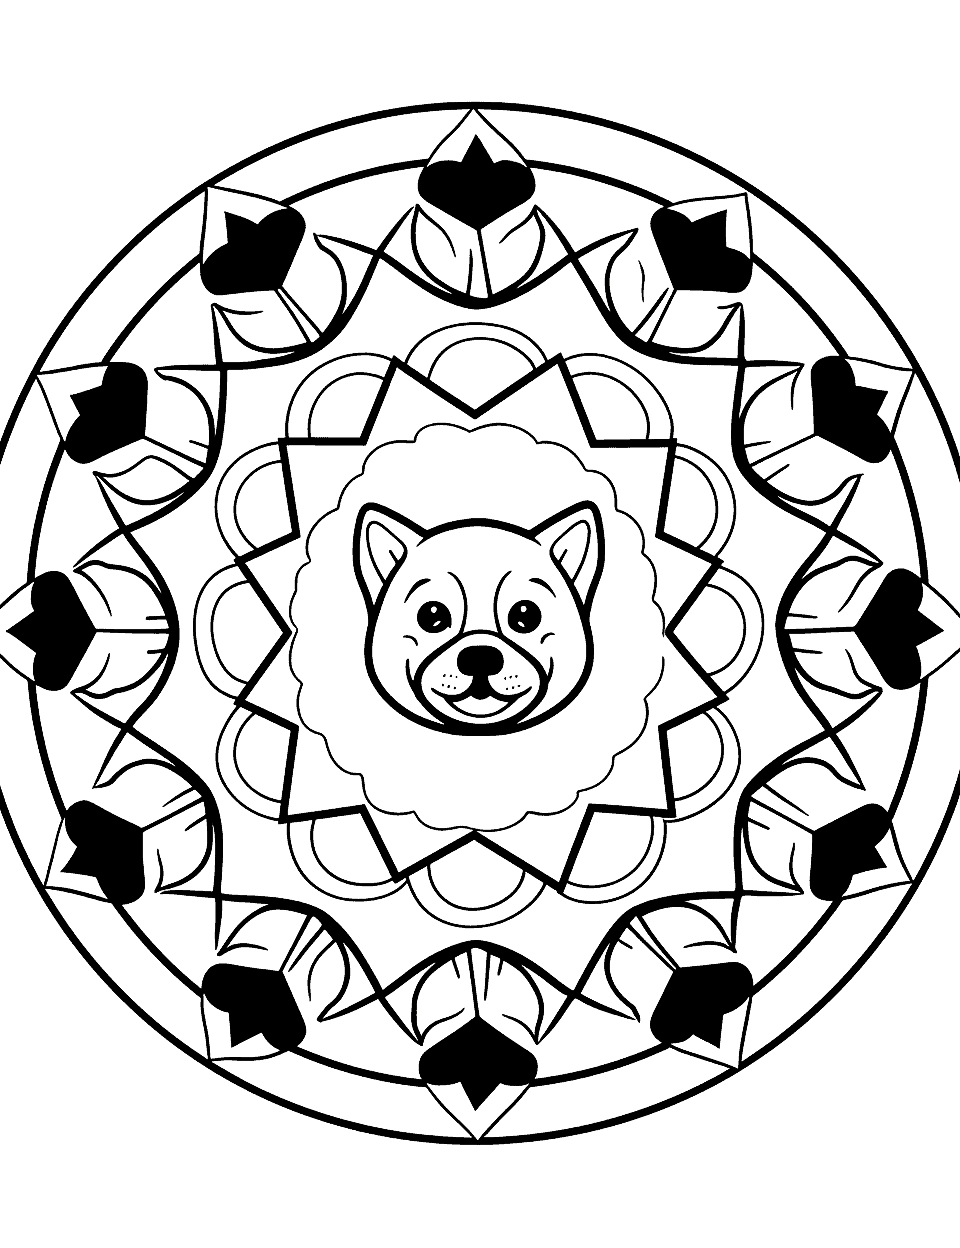 Dog Lover's Mandala Coloring Page - A mandala featuring a dog face surrounded by paw print shapes.